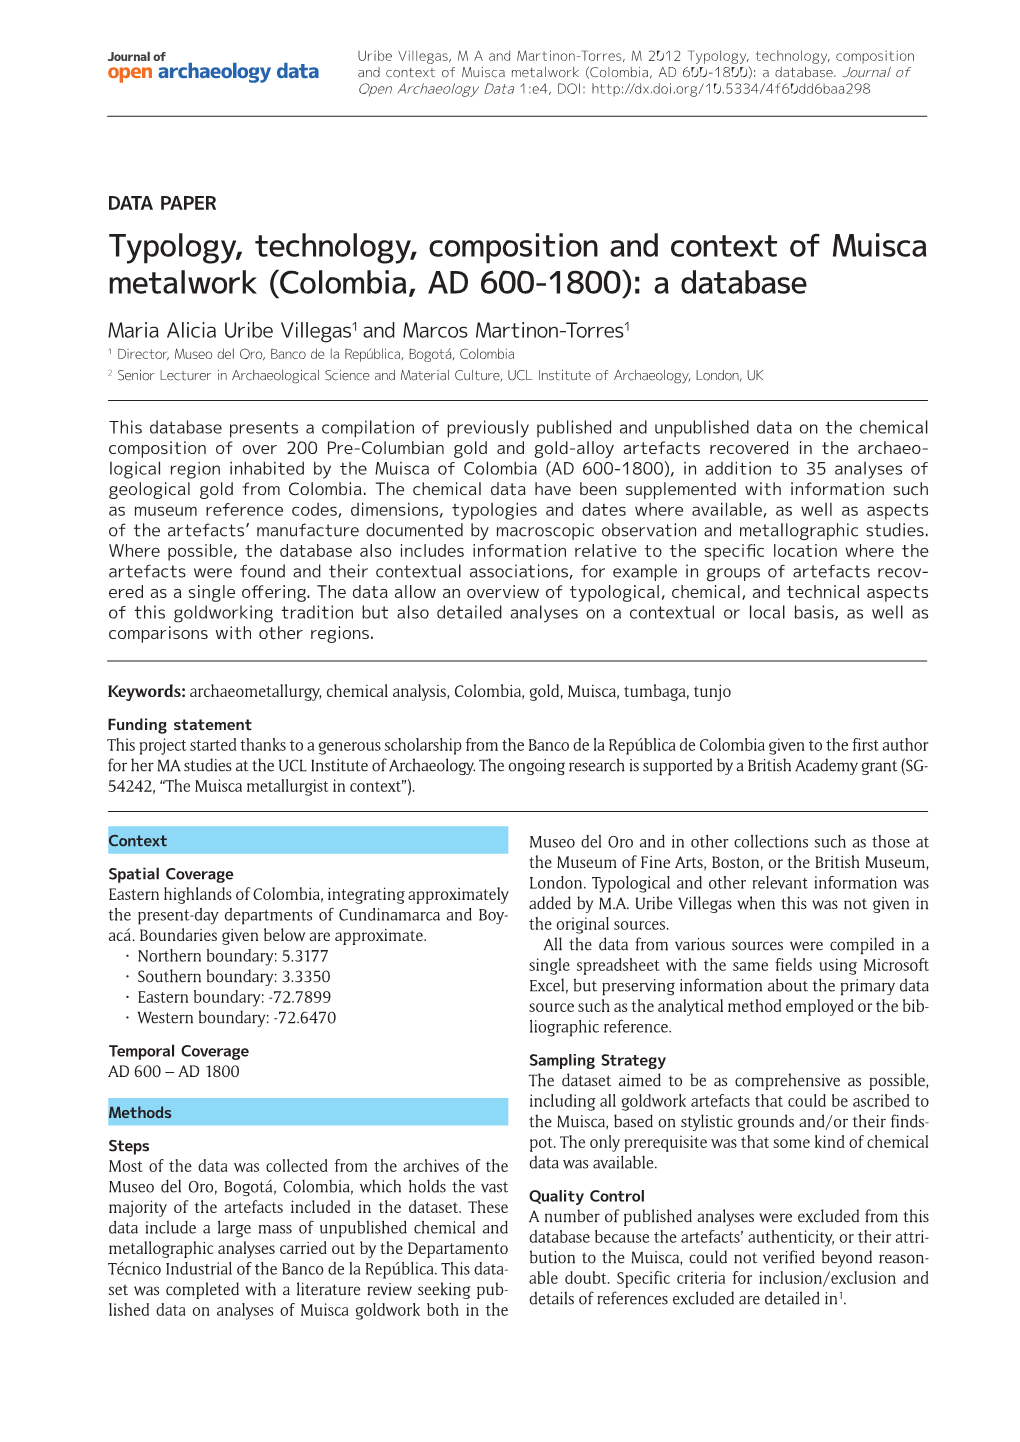 Typology, Technology, Composition and Context of Muisca Metalwork